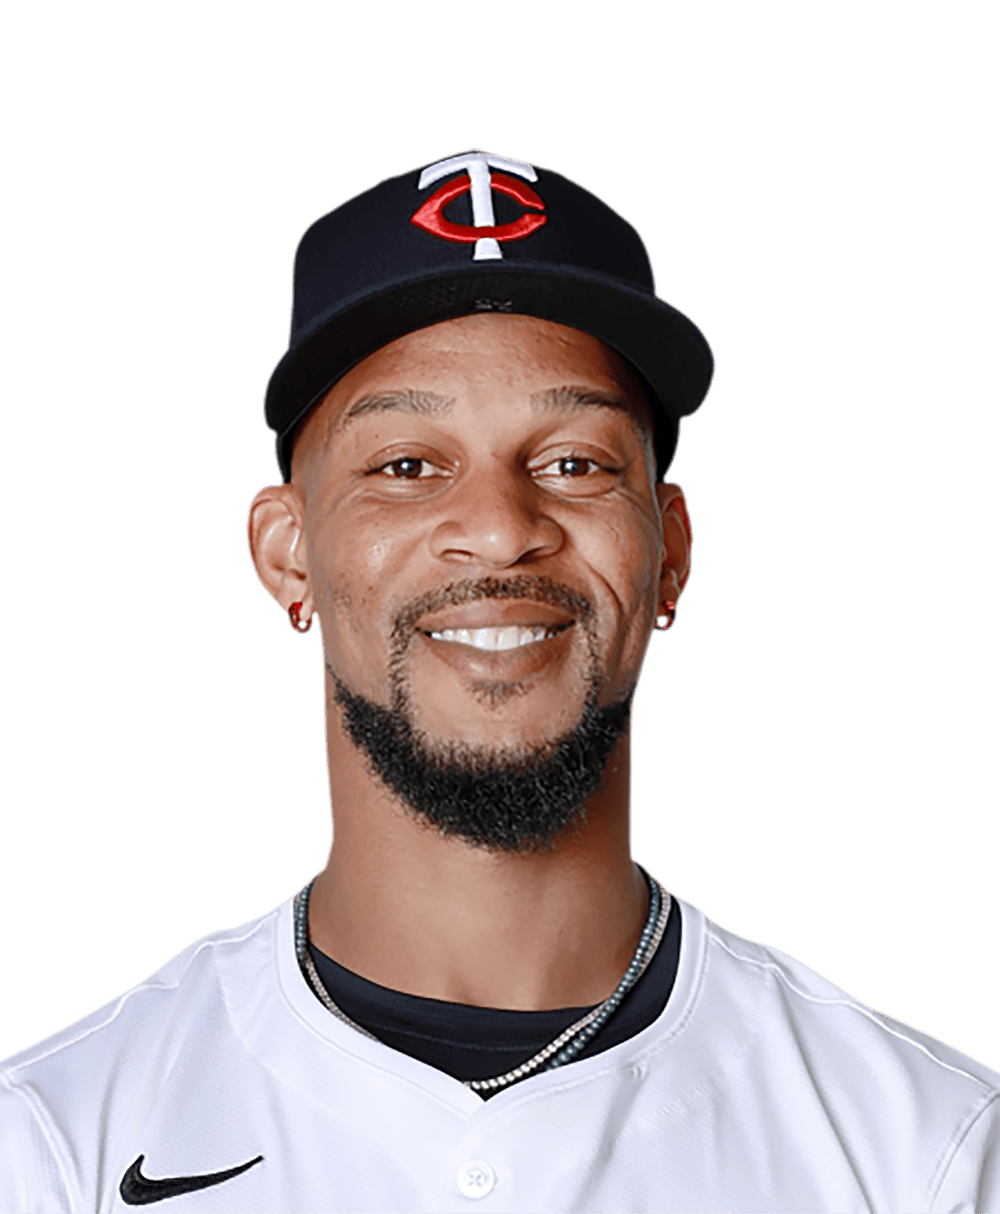 Is Byron Buxton the best player in MLB right now